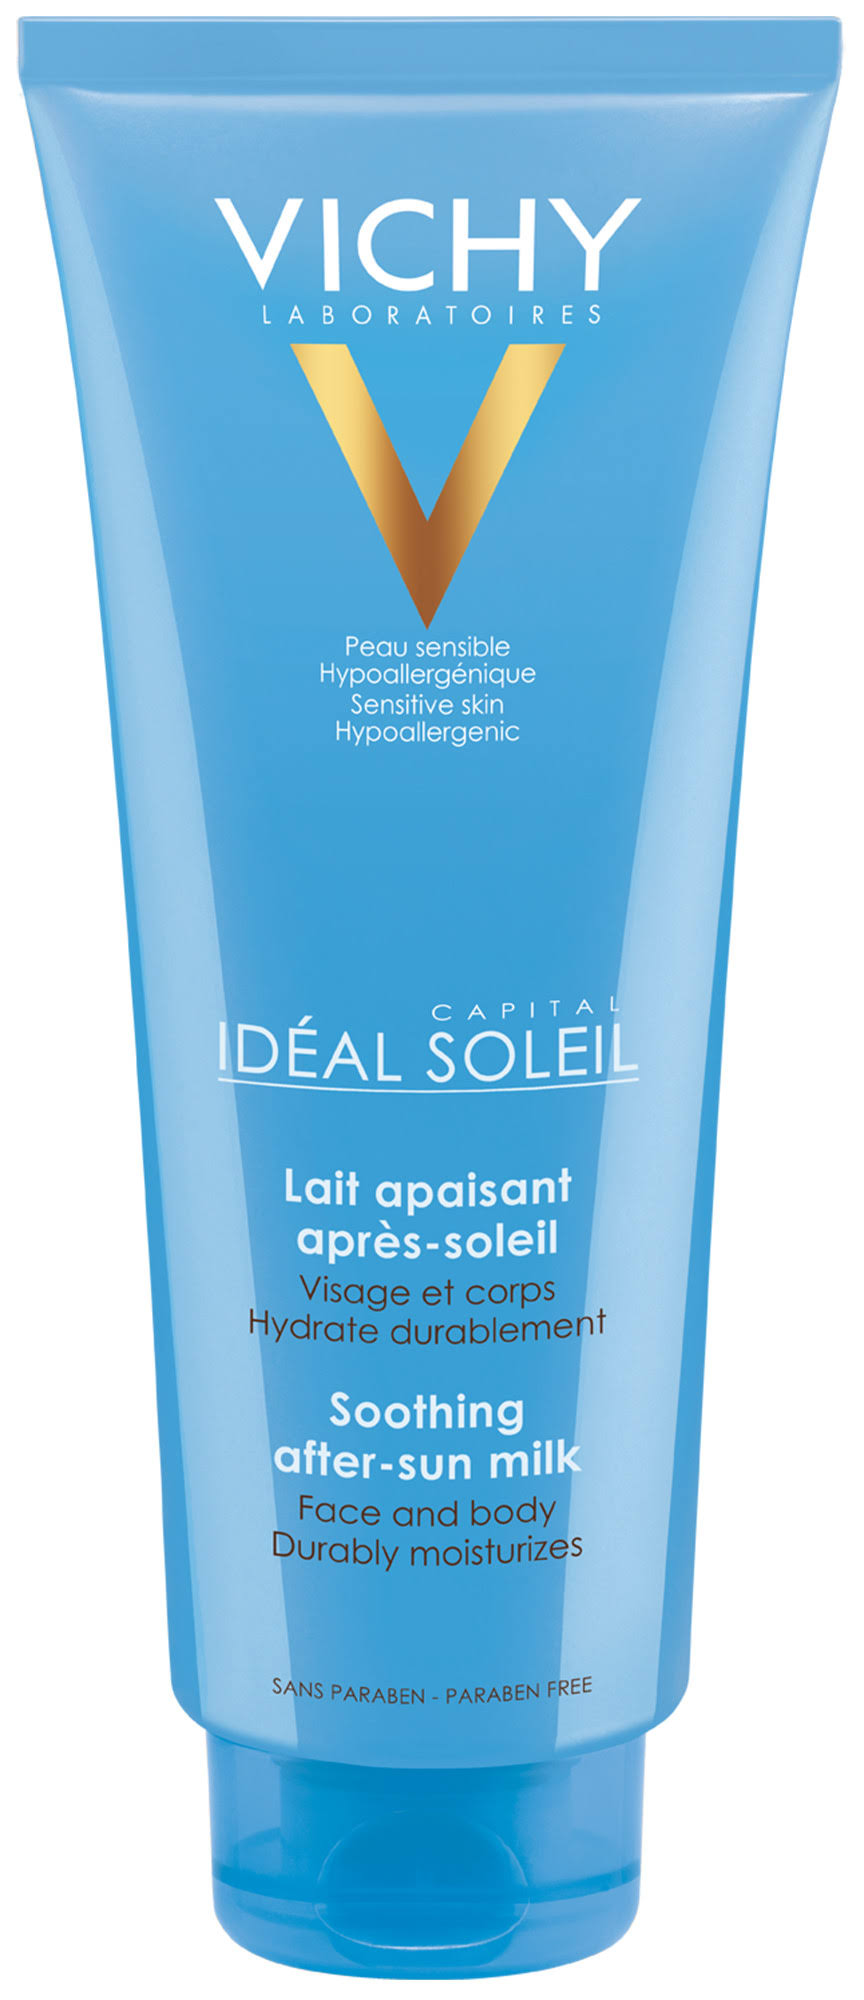 Vichy Ideal Soleil Soothing After-Sun Milk - 300ml